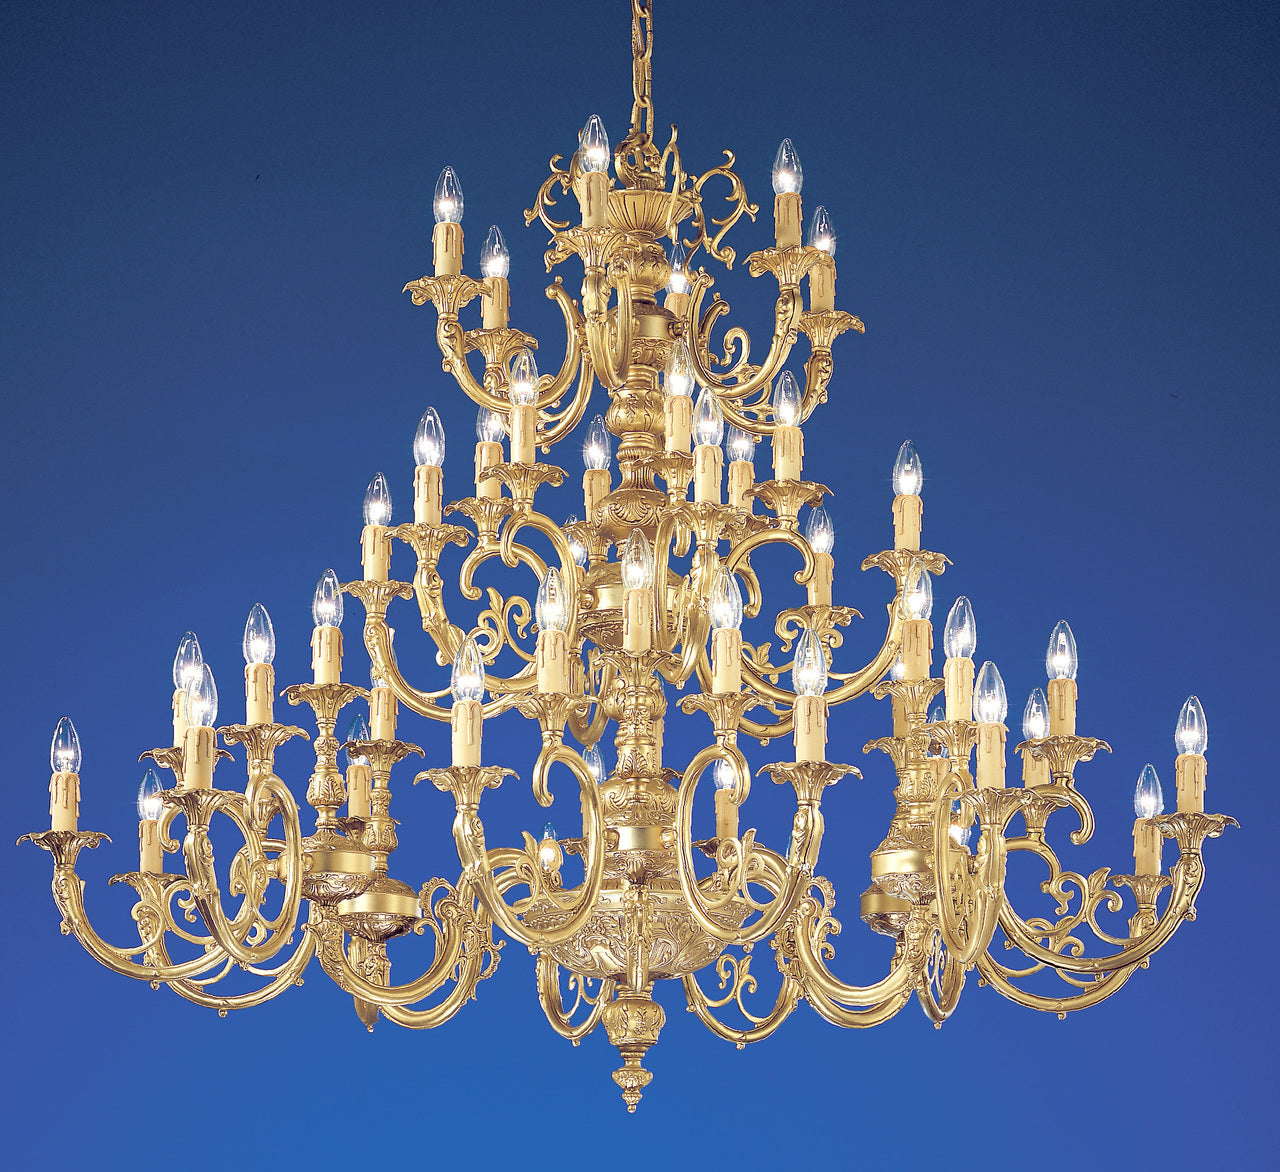 Classic Lighting 5748 SBB Princeton Cast Brass Chandelier in Satin Bronze/Brown Patina (Imported from Spain)